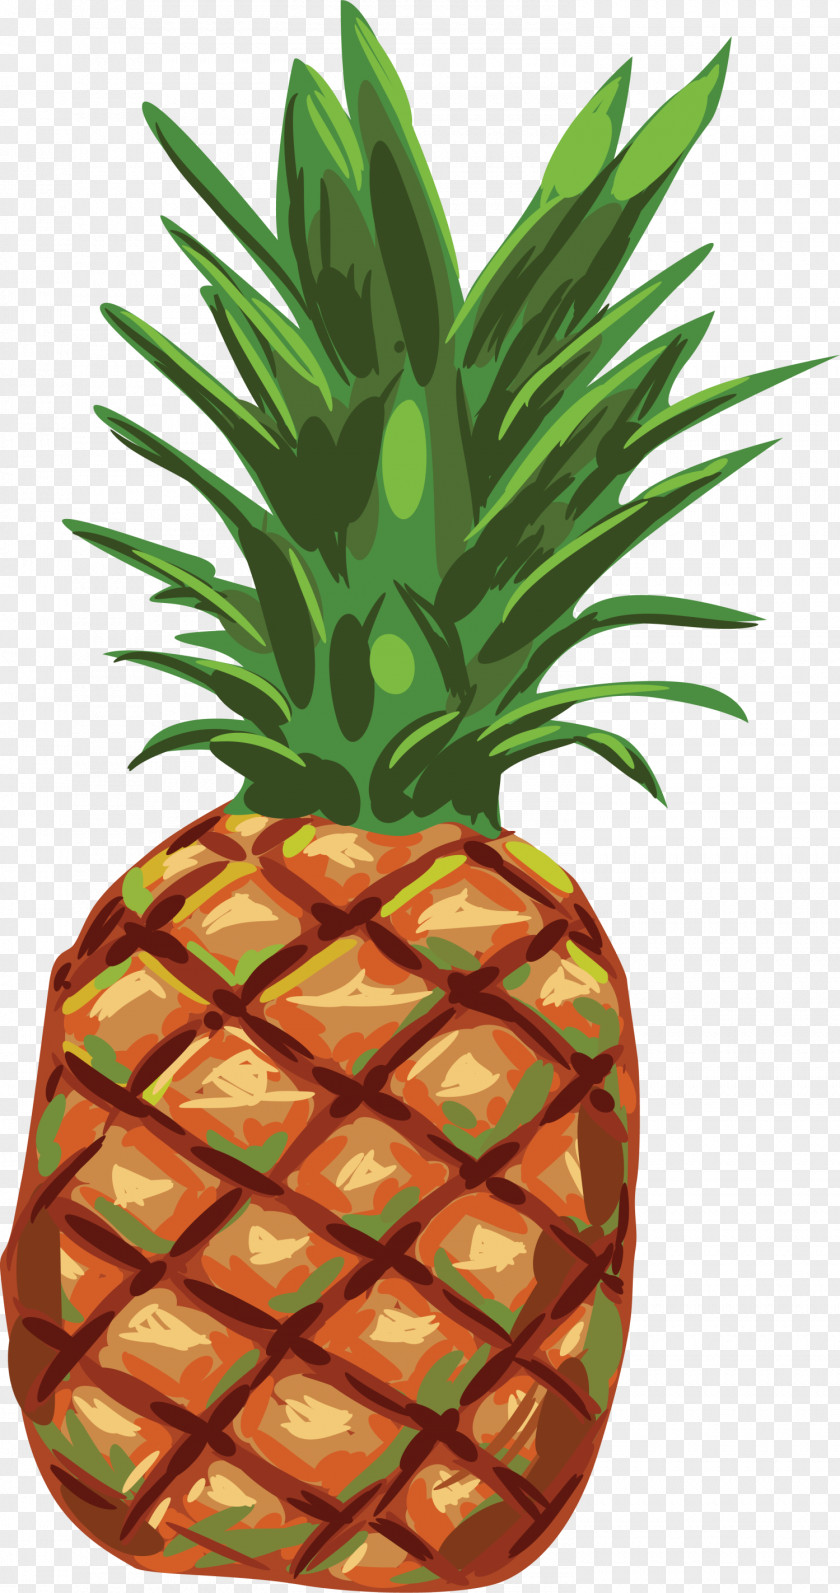 Green Hand Painted Pineapple Fruit PNG